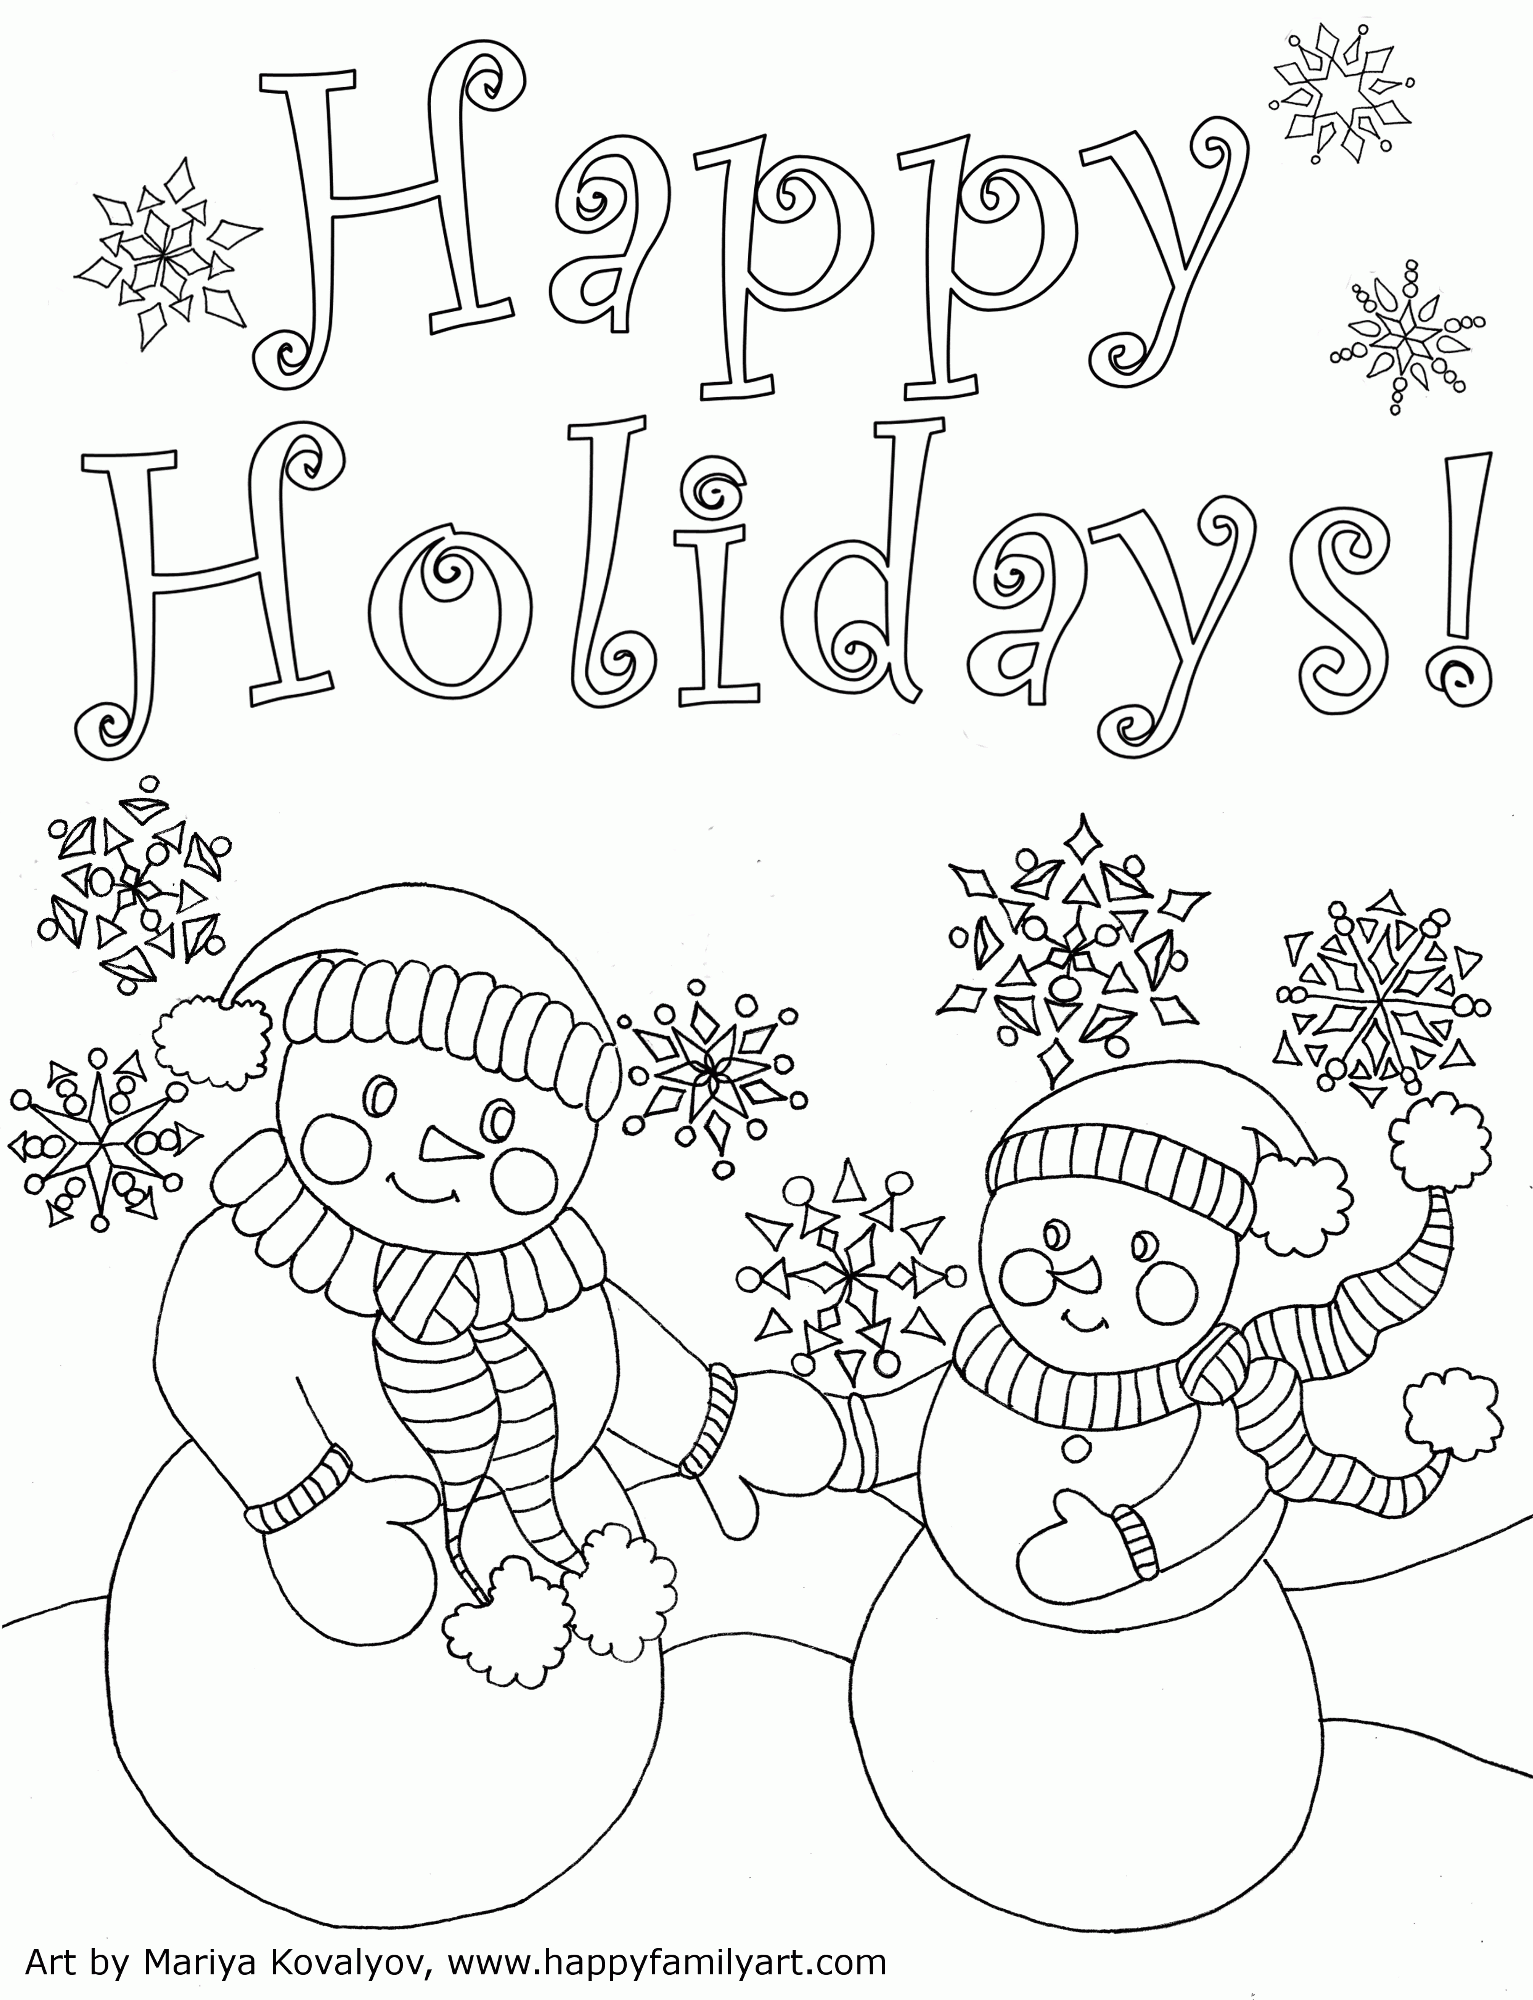 Download Printable Coloring Pages For Kids Holiday Drawing With Crayons